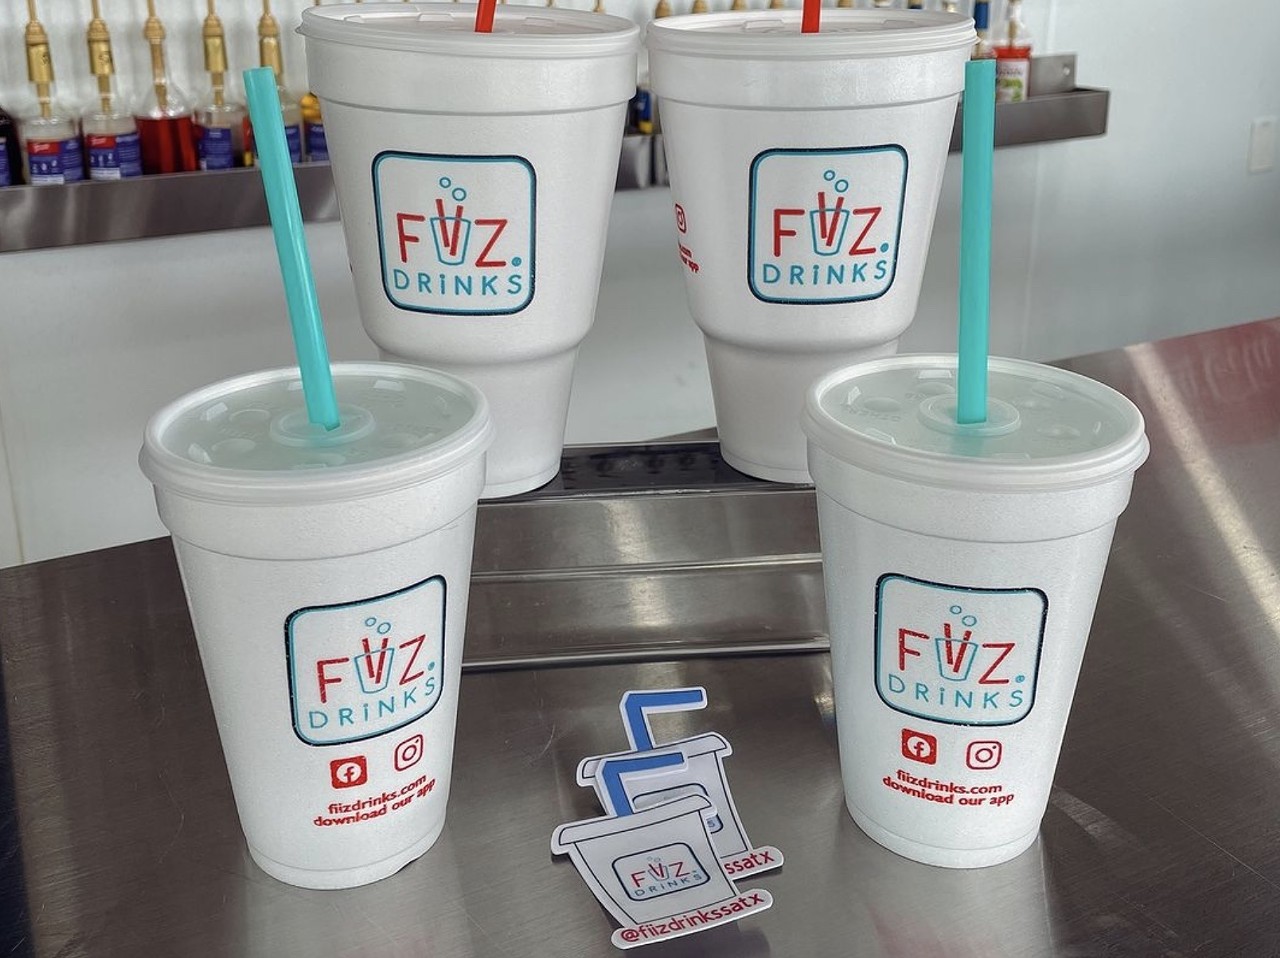 FiiZ Drinks
7215 E. Loop 1604 North, Converse, fiizdrinks.com
Utah-based customizable drink chain FiiZ Drinks established its first San Antonio location in the long-vacant Sonic off Broadway in February, and now customers eagerly await the opening of their Converse location, which was announced last fall.